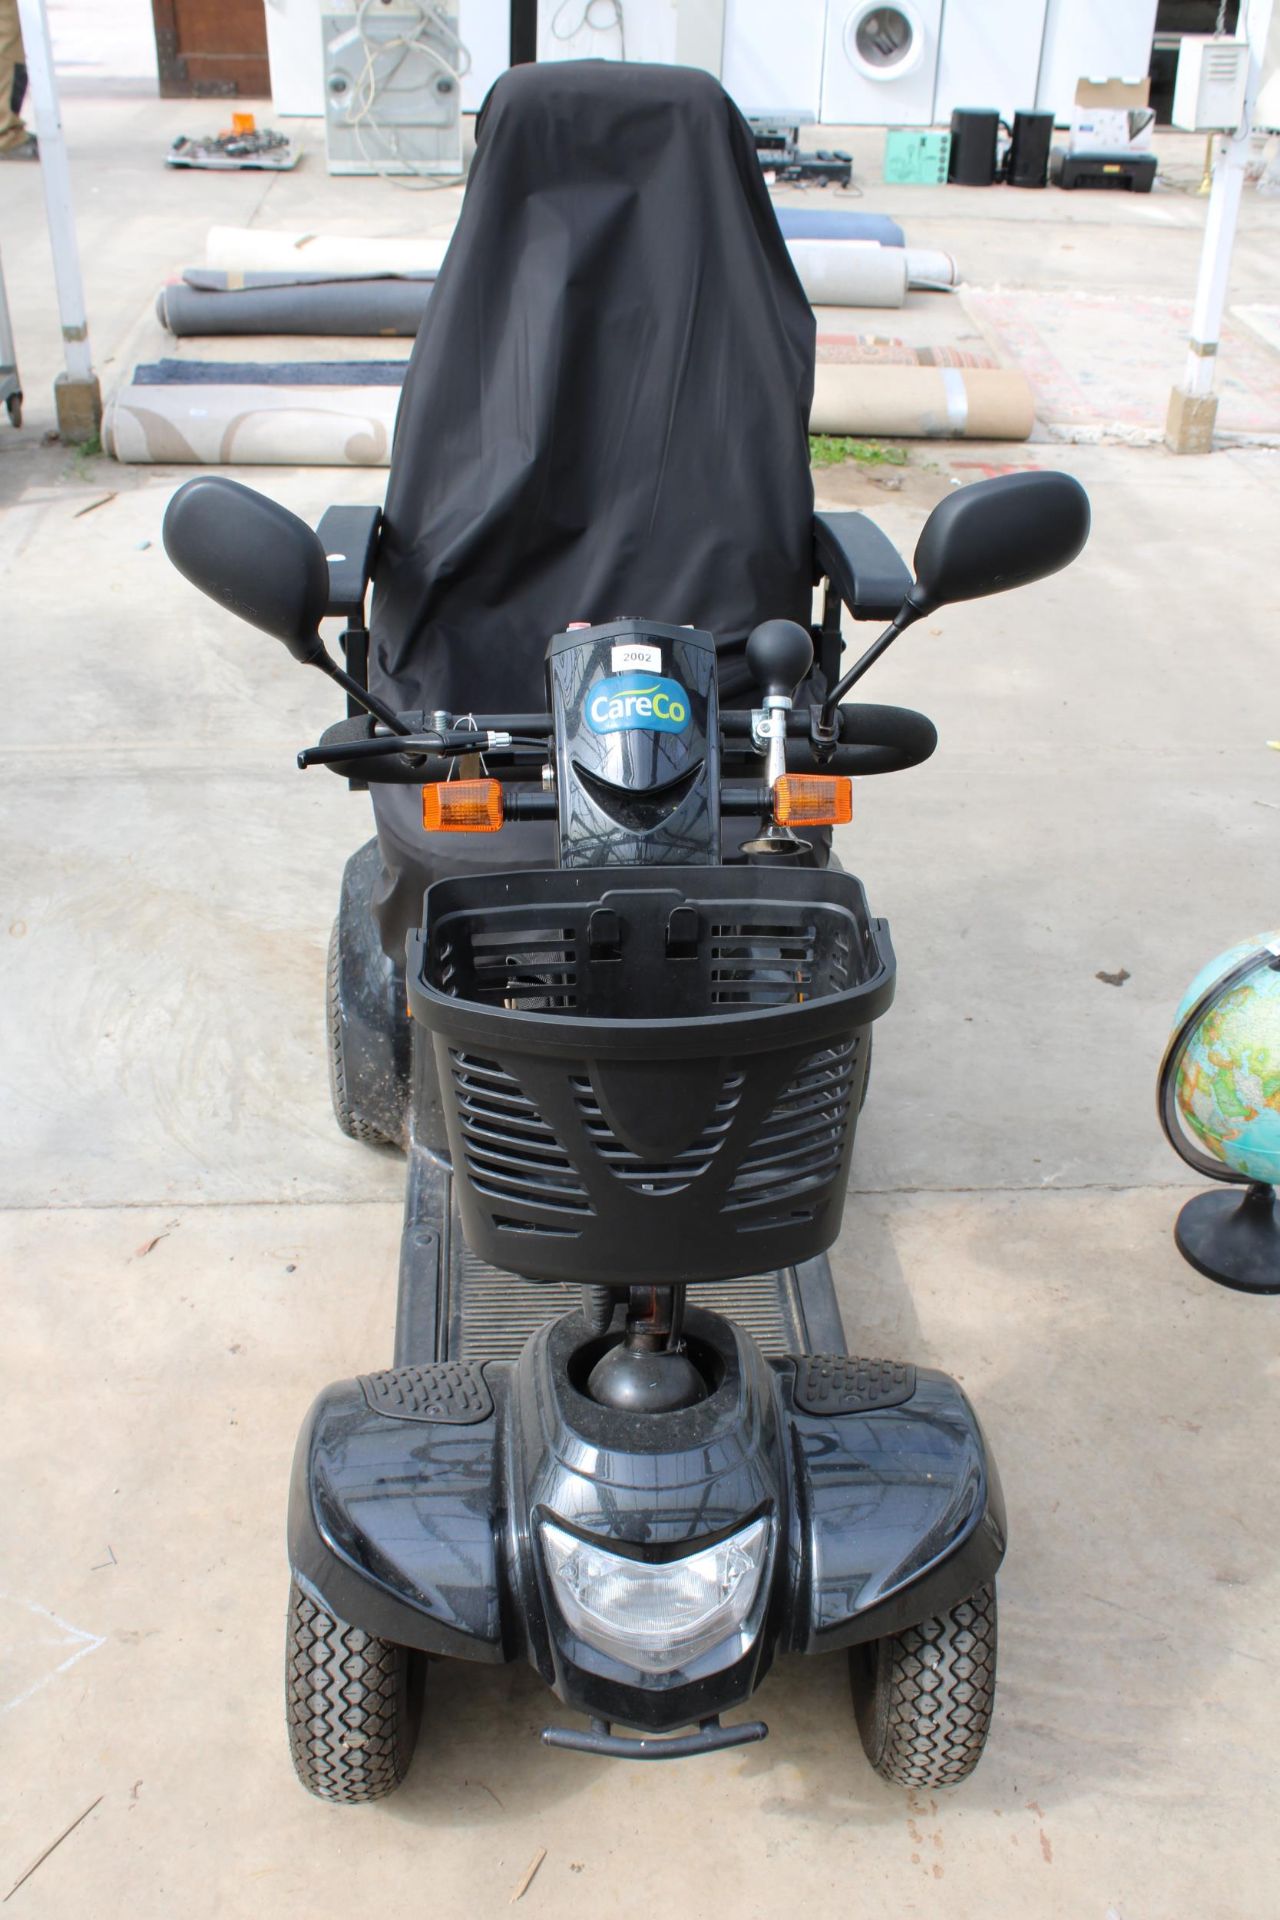 A FOUR WHEEL CARE CO ELECTRIC MOBILITY SCOOTER COMPLETE WITH CHARGER - Bild 2 aus 7